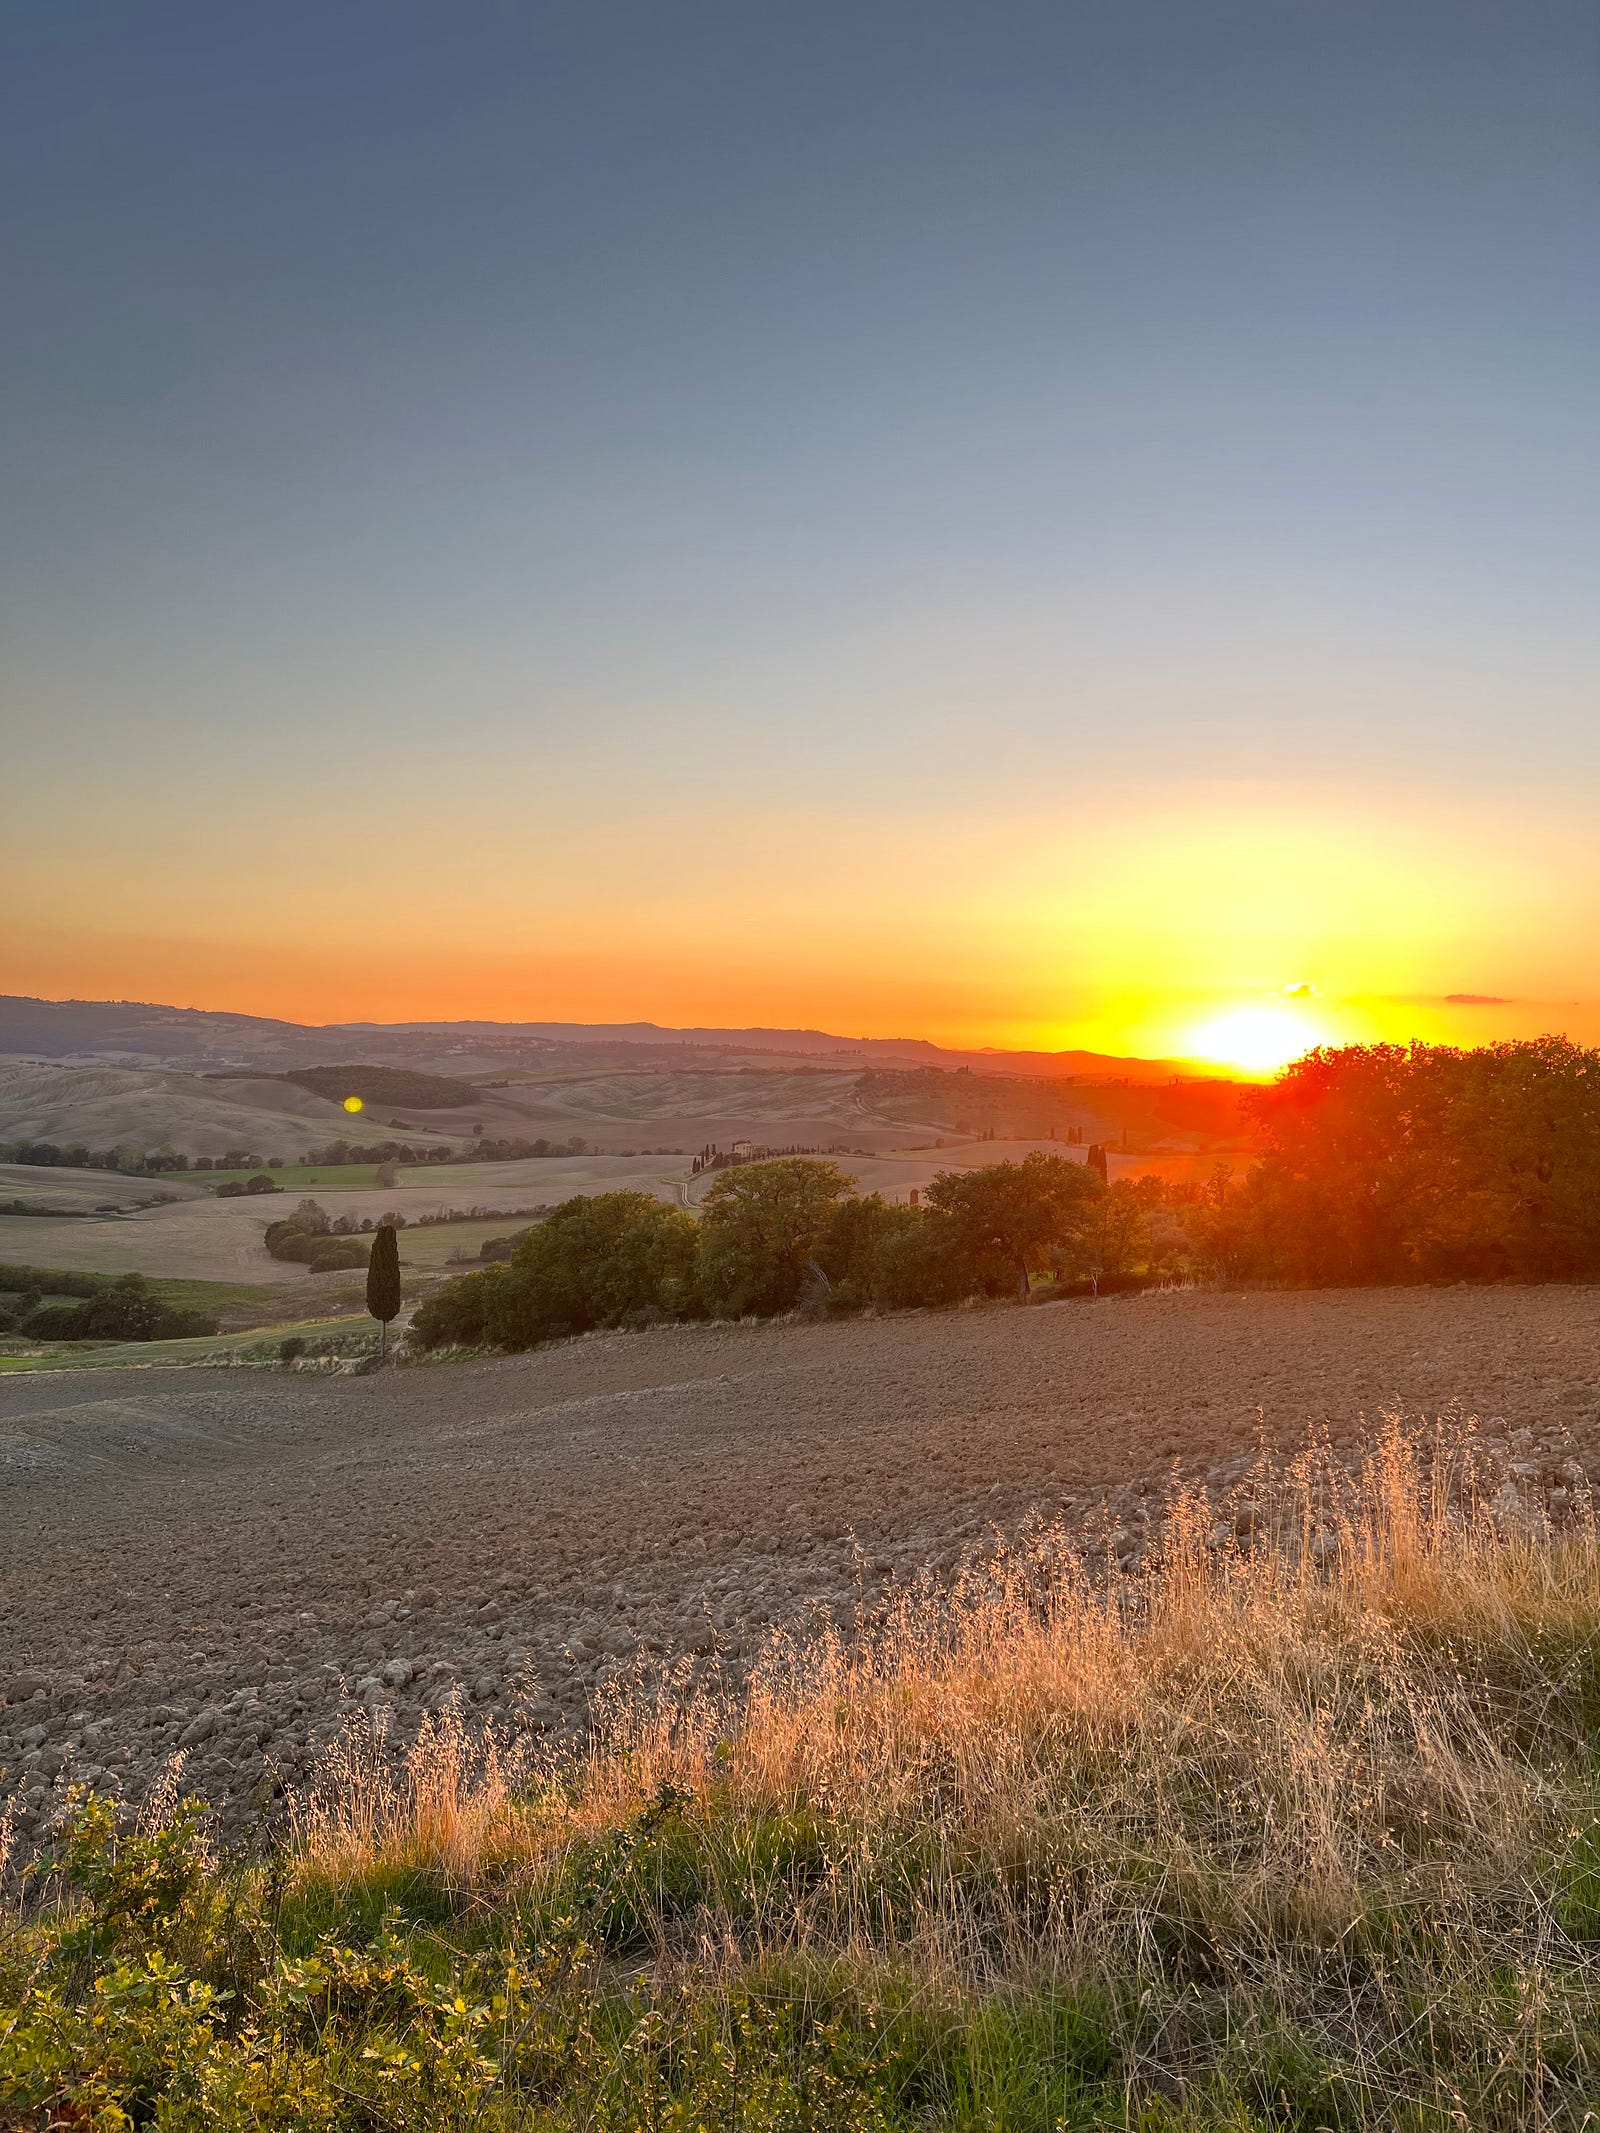 Photo of a stunning sunset overlooking plowed fields in the forground with the purpled badlands in the distance. Pienza, Tuscany.